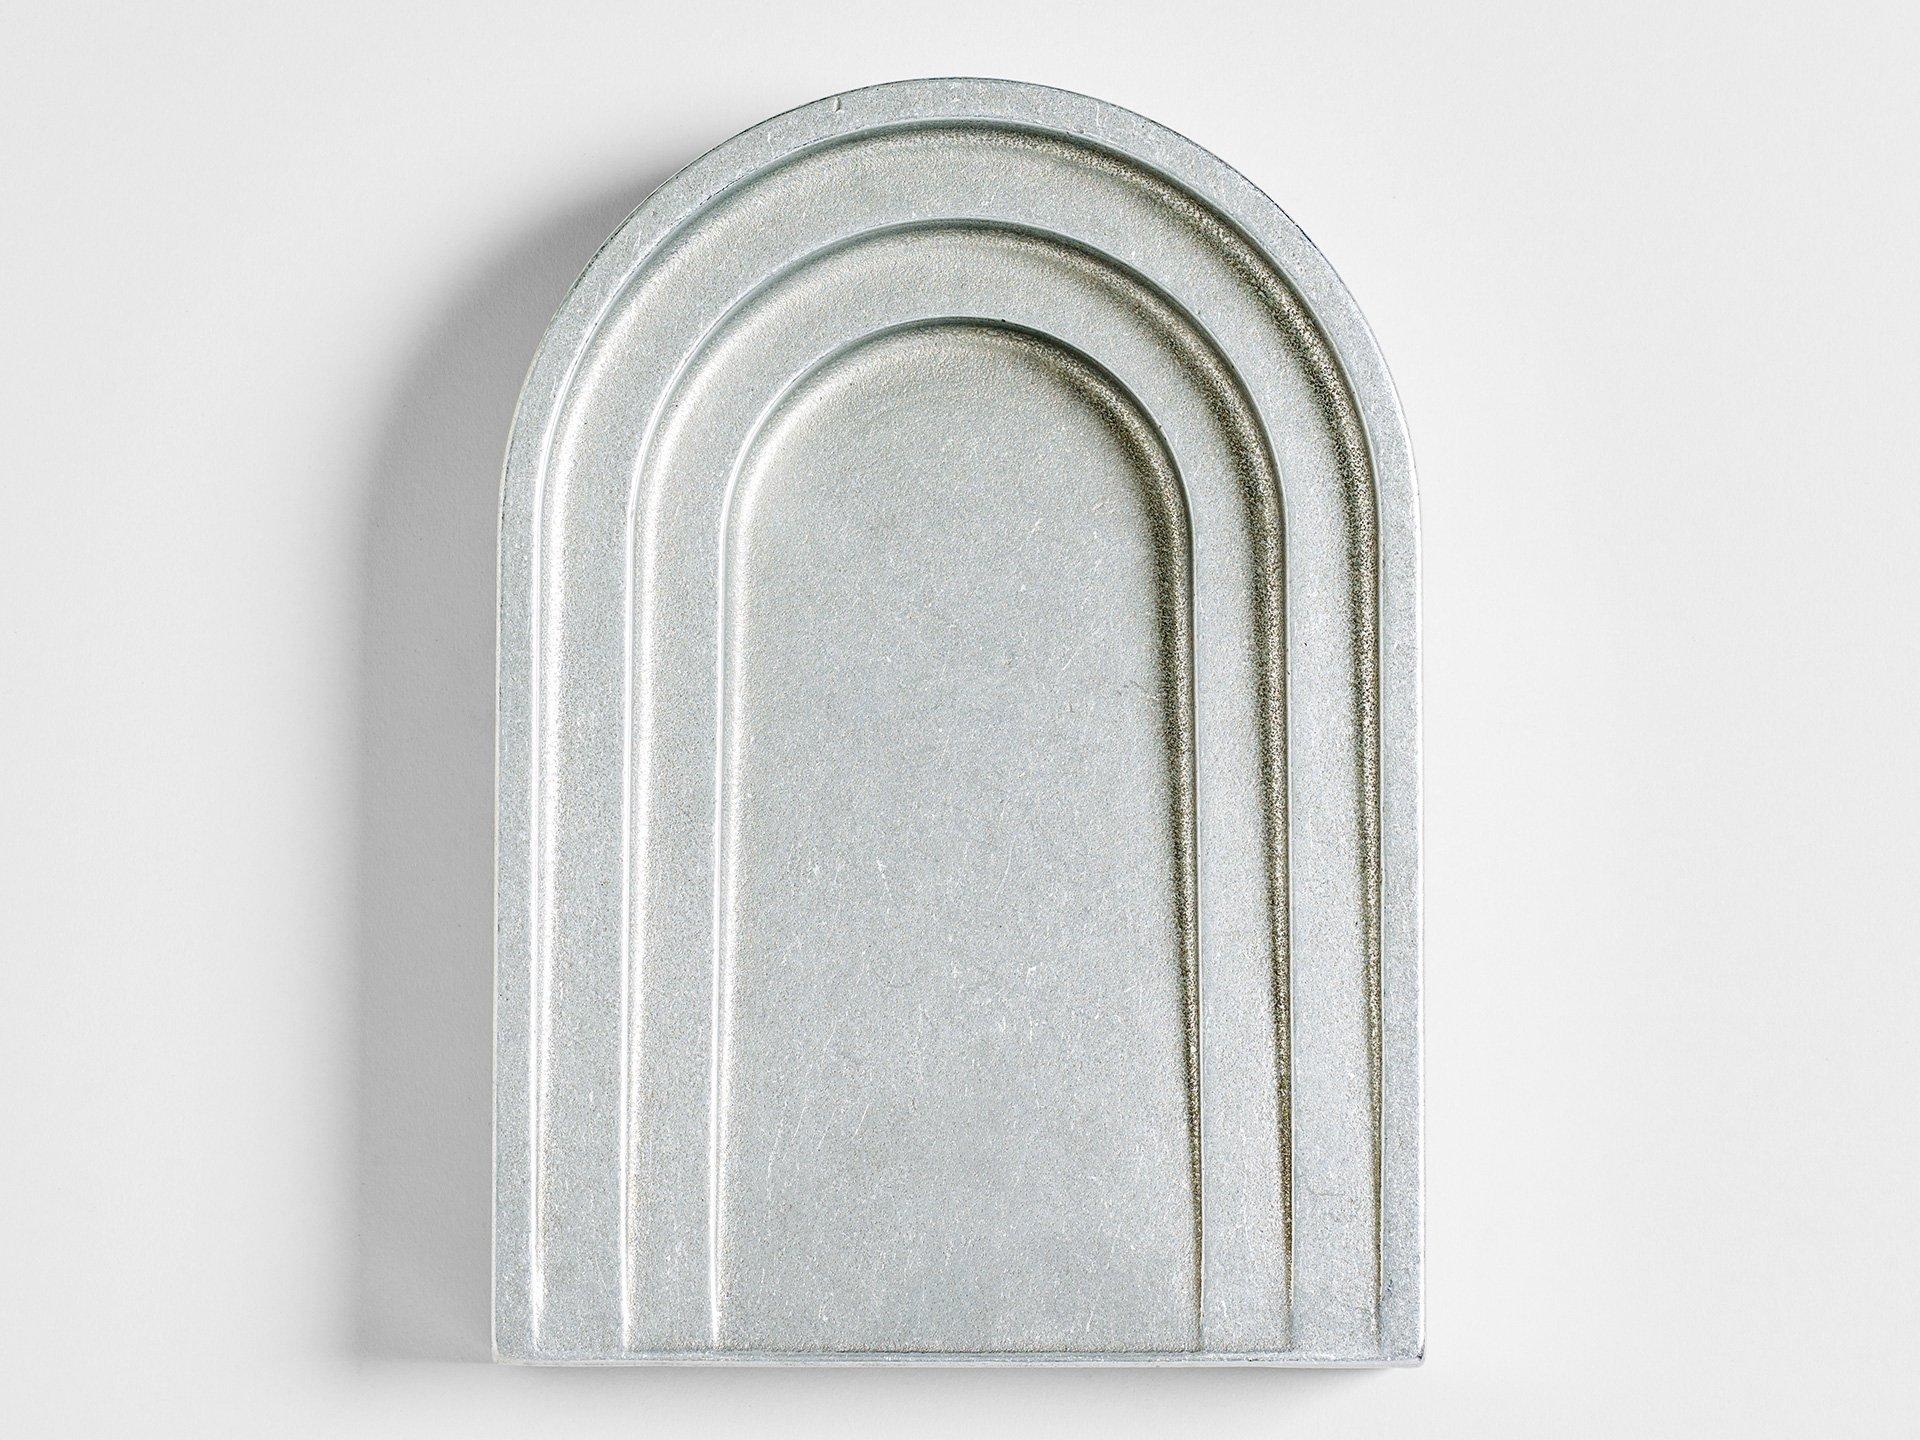 Thoronet dish polished aluminium by Henry Wilson
Dimensions: D 5 x W 20 x H 30 cm
Materials: Aluminium 

Thoronet dish, shares its' name and arched lines with the Abby in the south of France. It is made, polished and finished in Sydney,